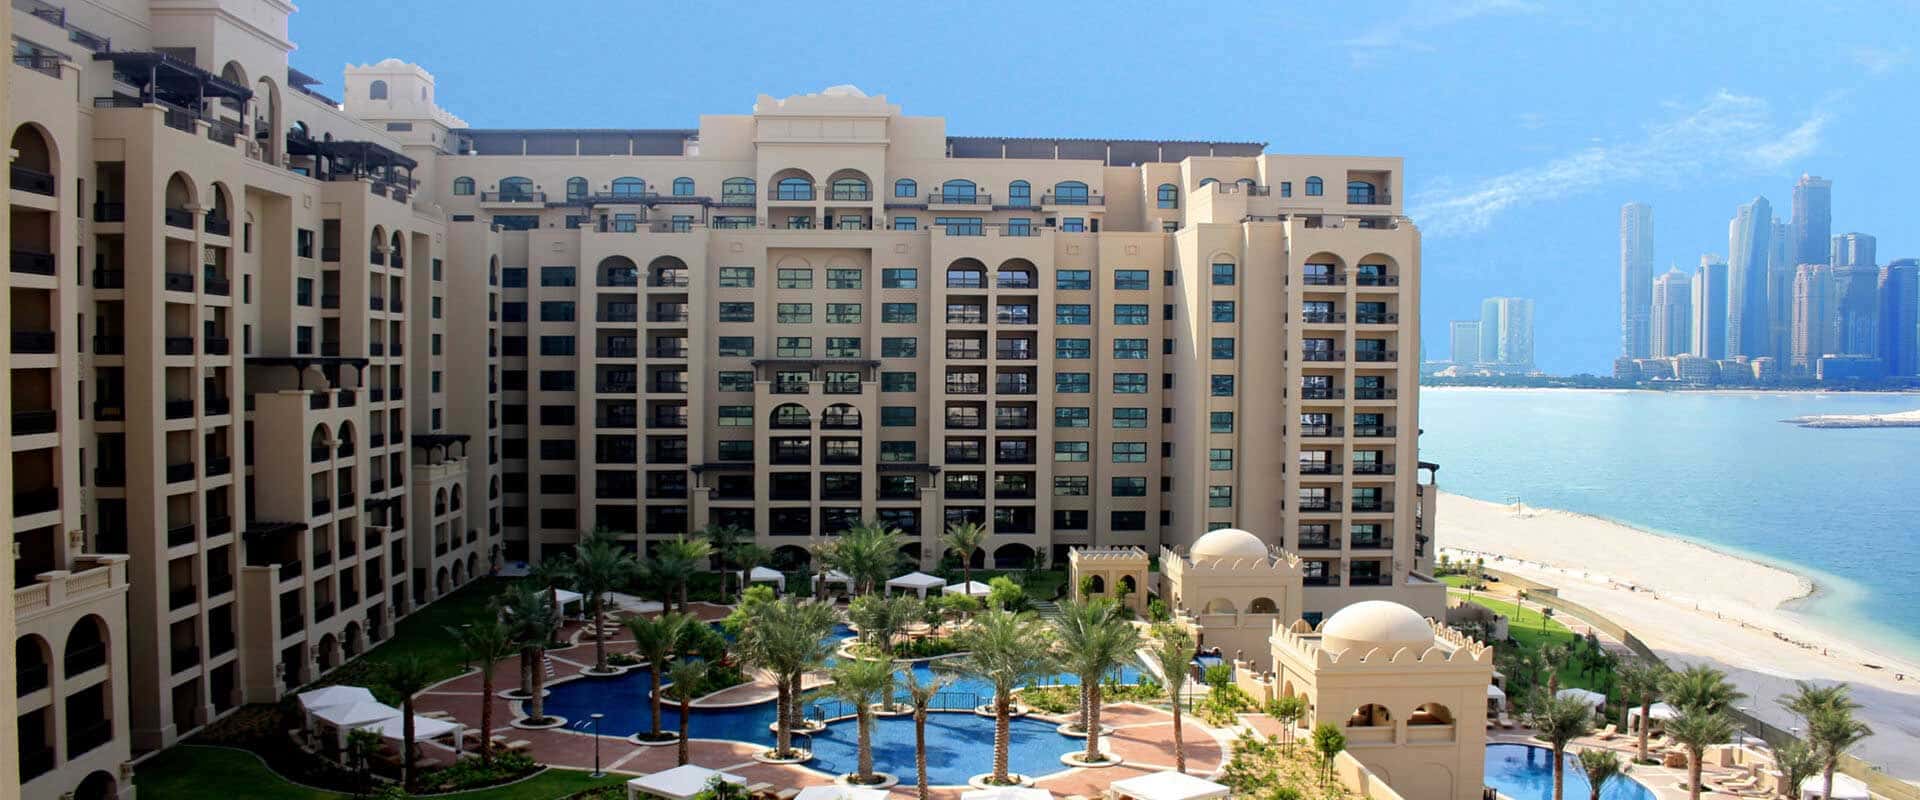 Properties for Sale in Dubai by IFA Hotels & Resorts